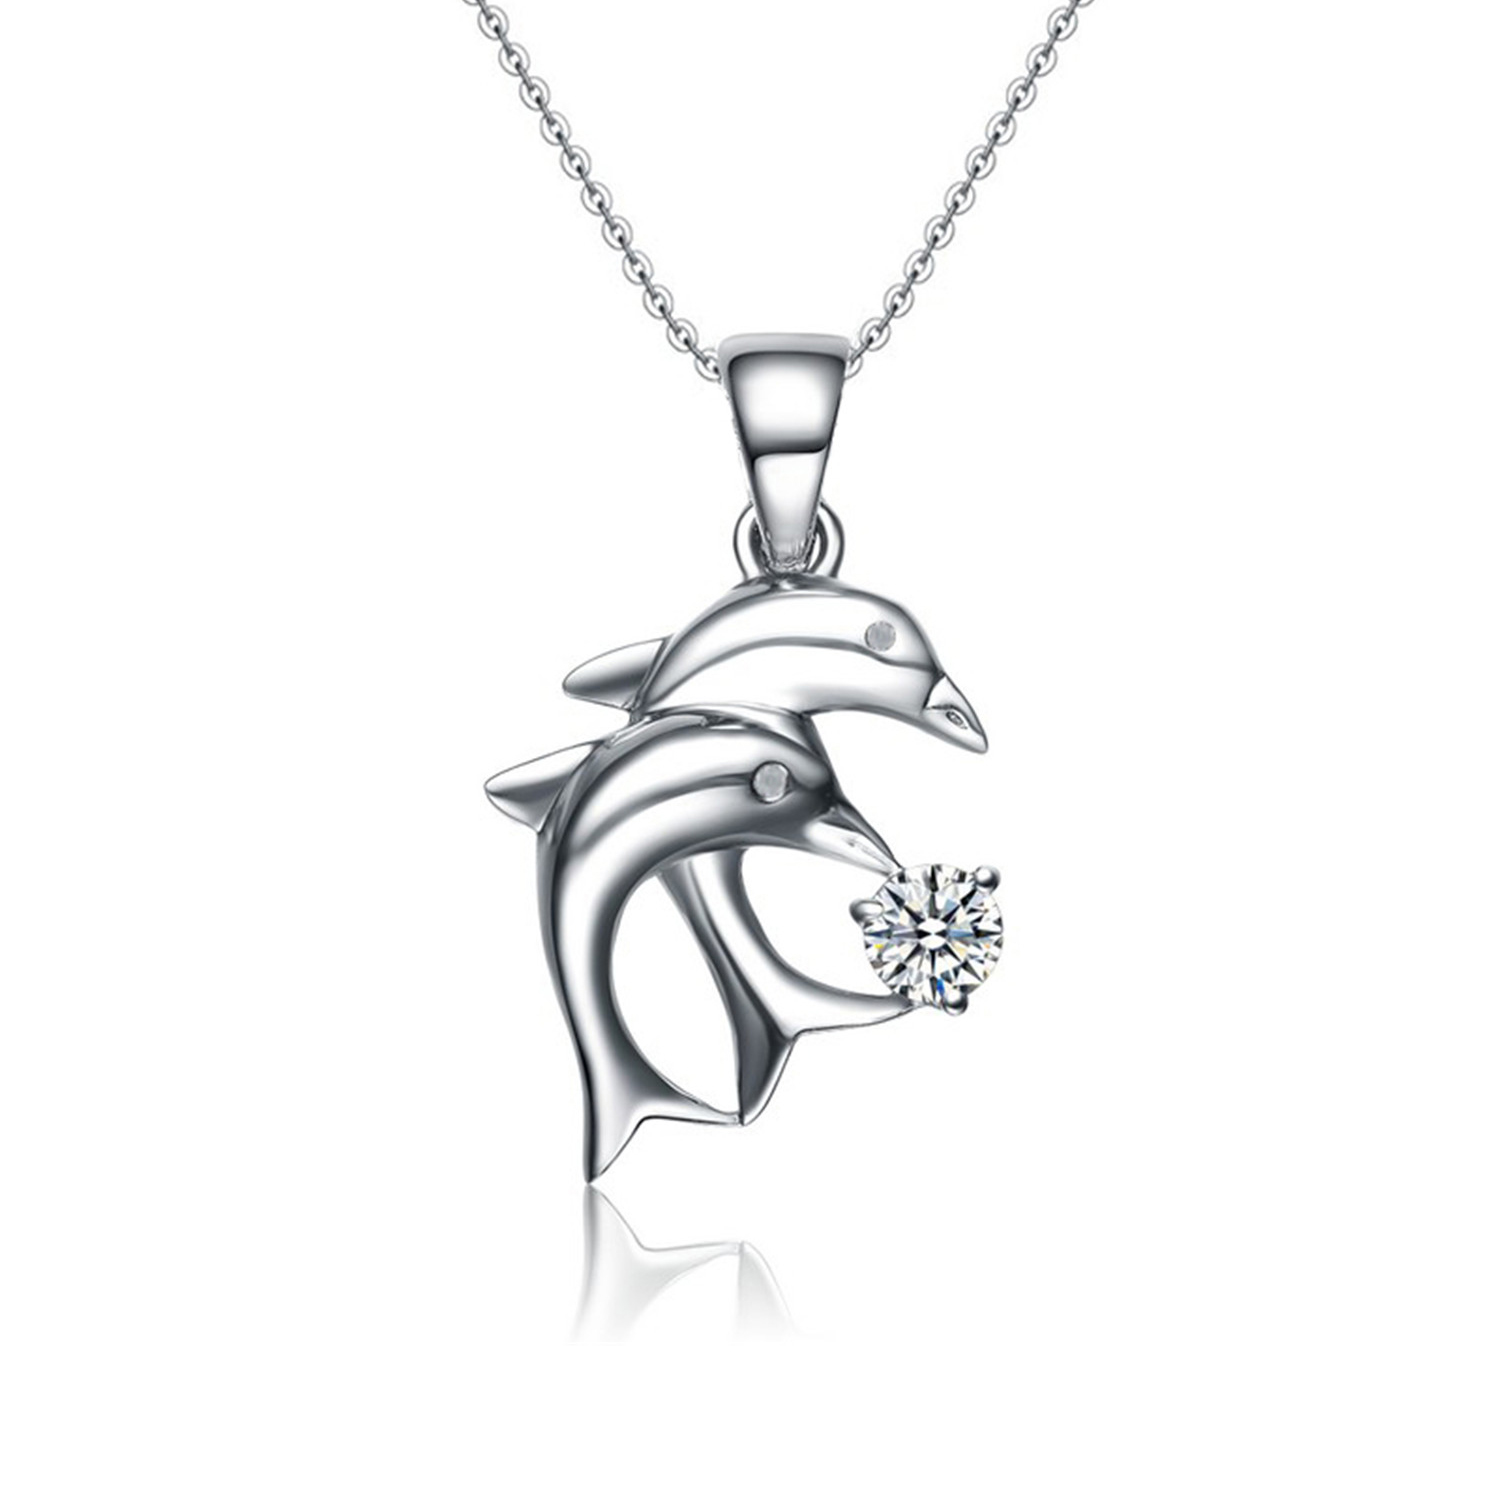 Customize Fashion 925 Silver Two Dolphins Pendant Necklace Cross Chain Necklaces for women gift(图1)